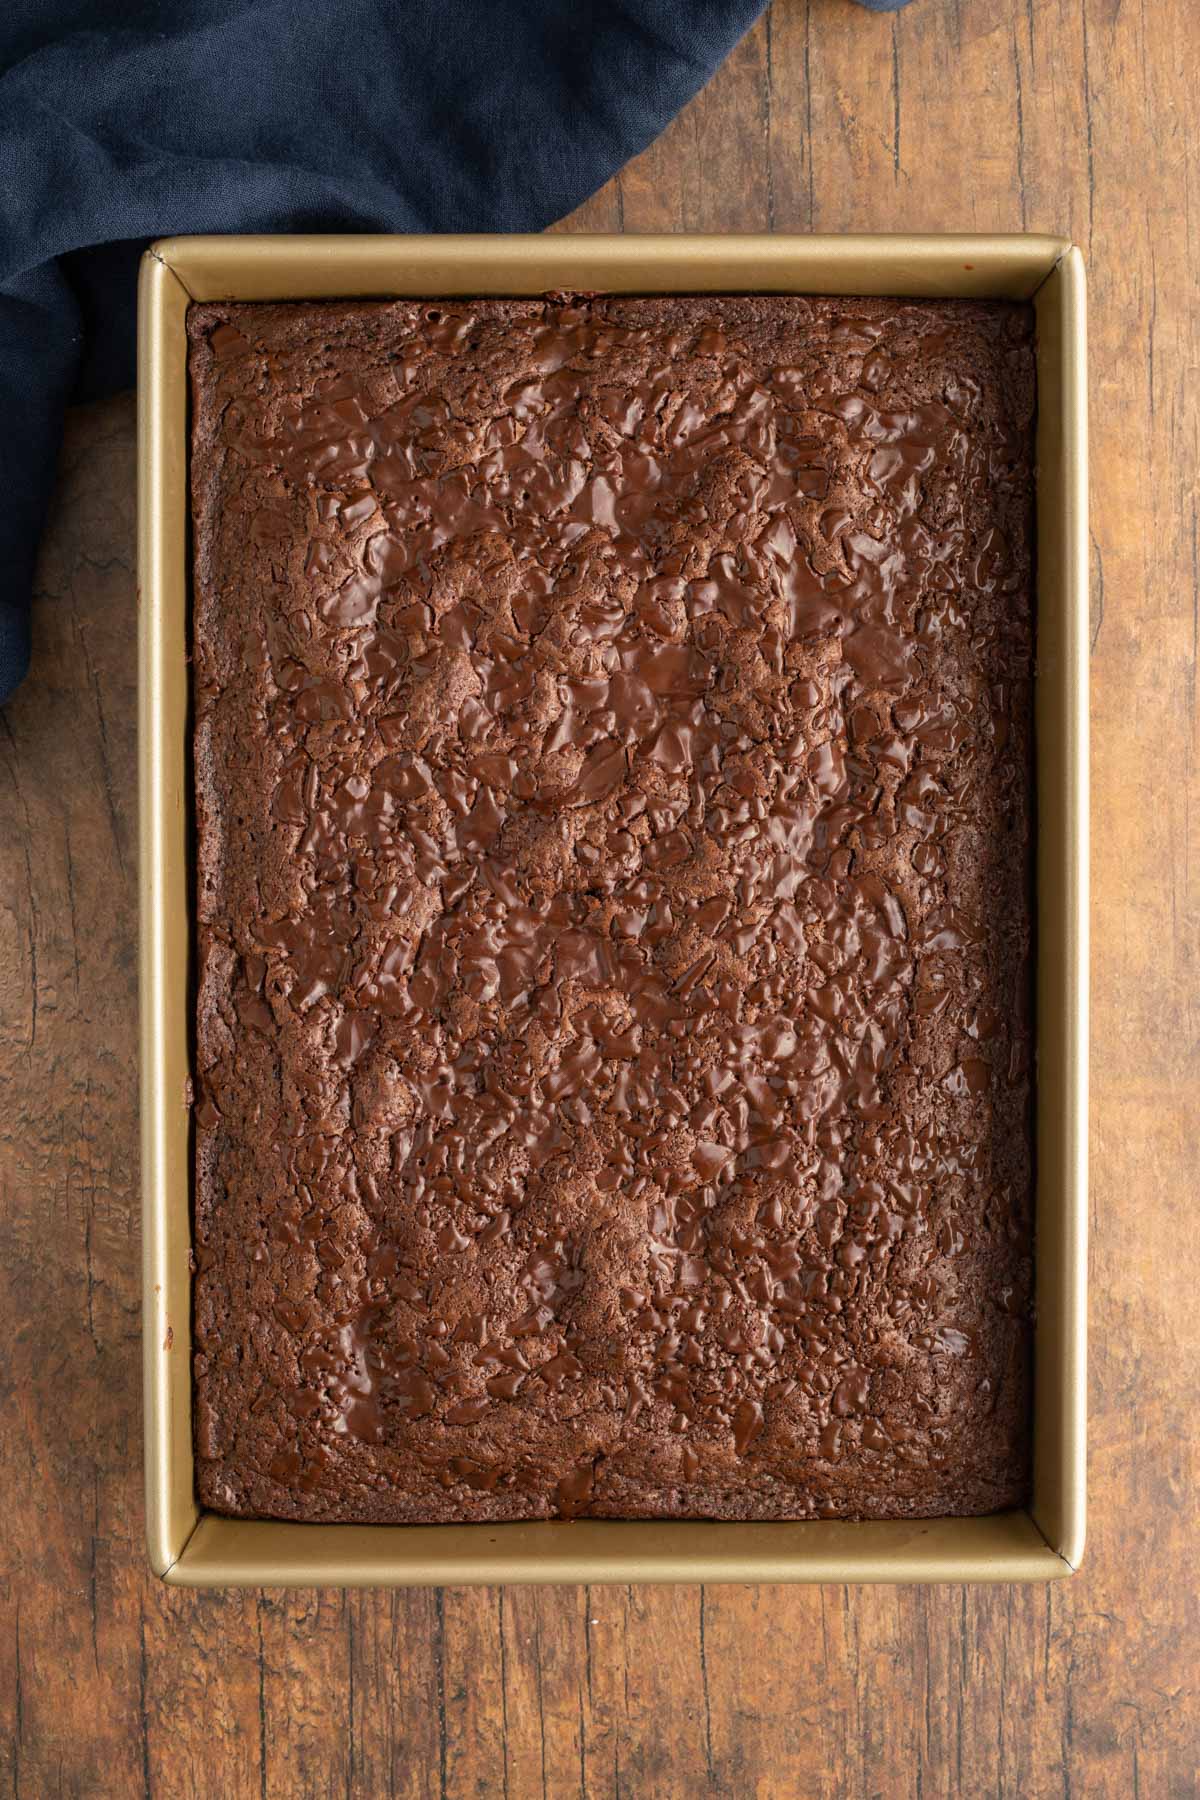 Cakey Brownies in pan after baking before slicing